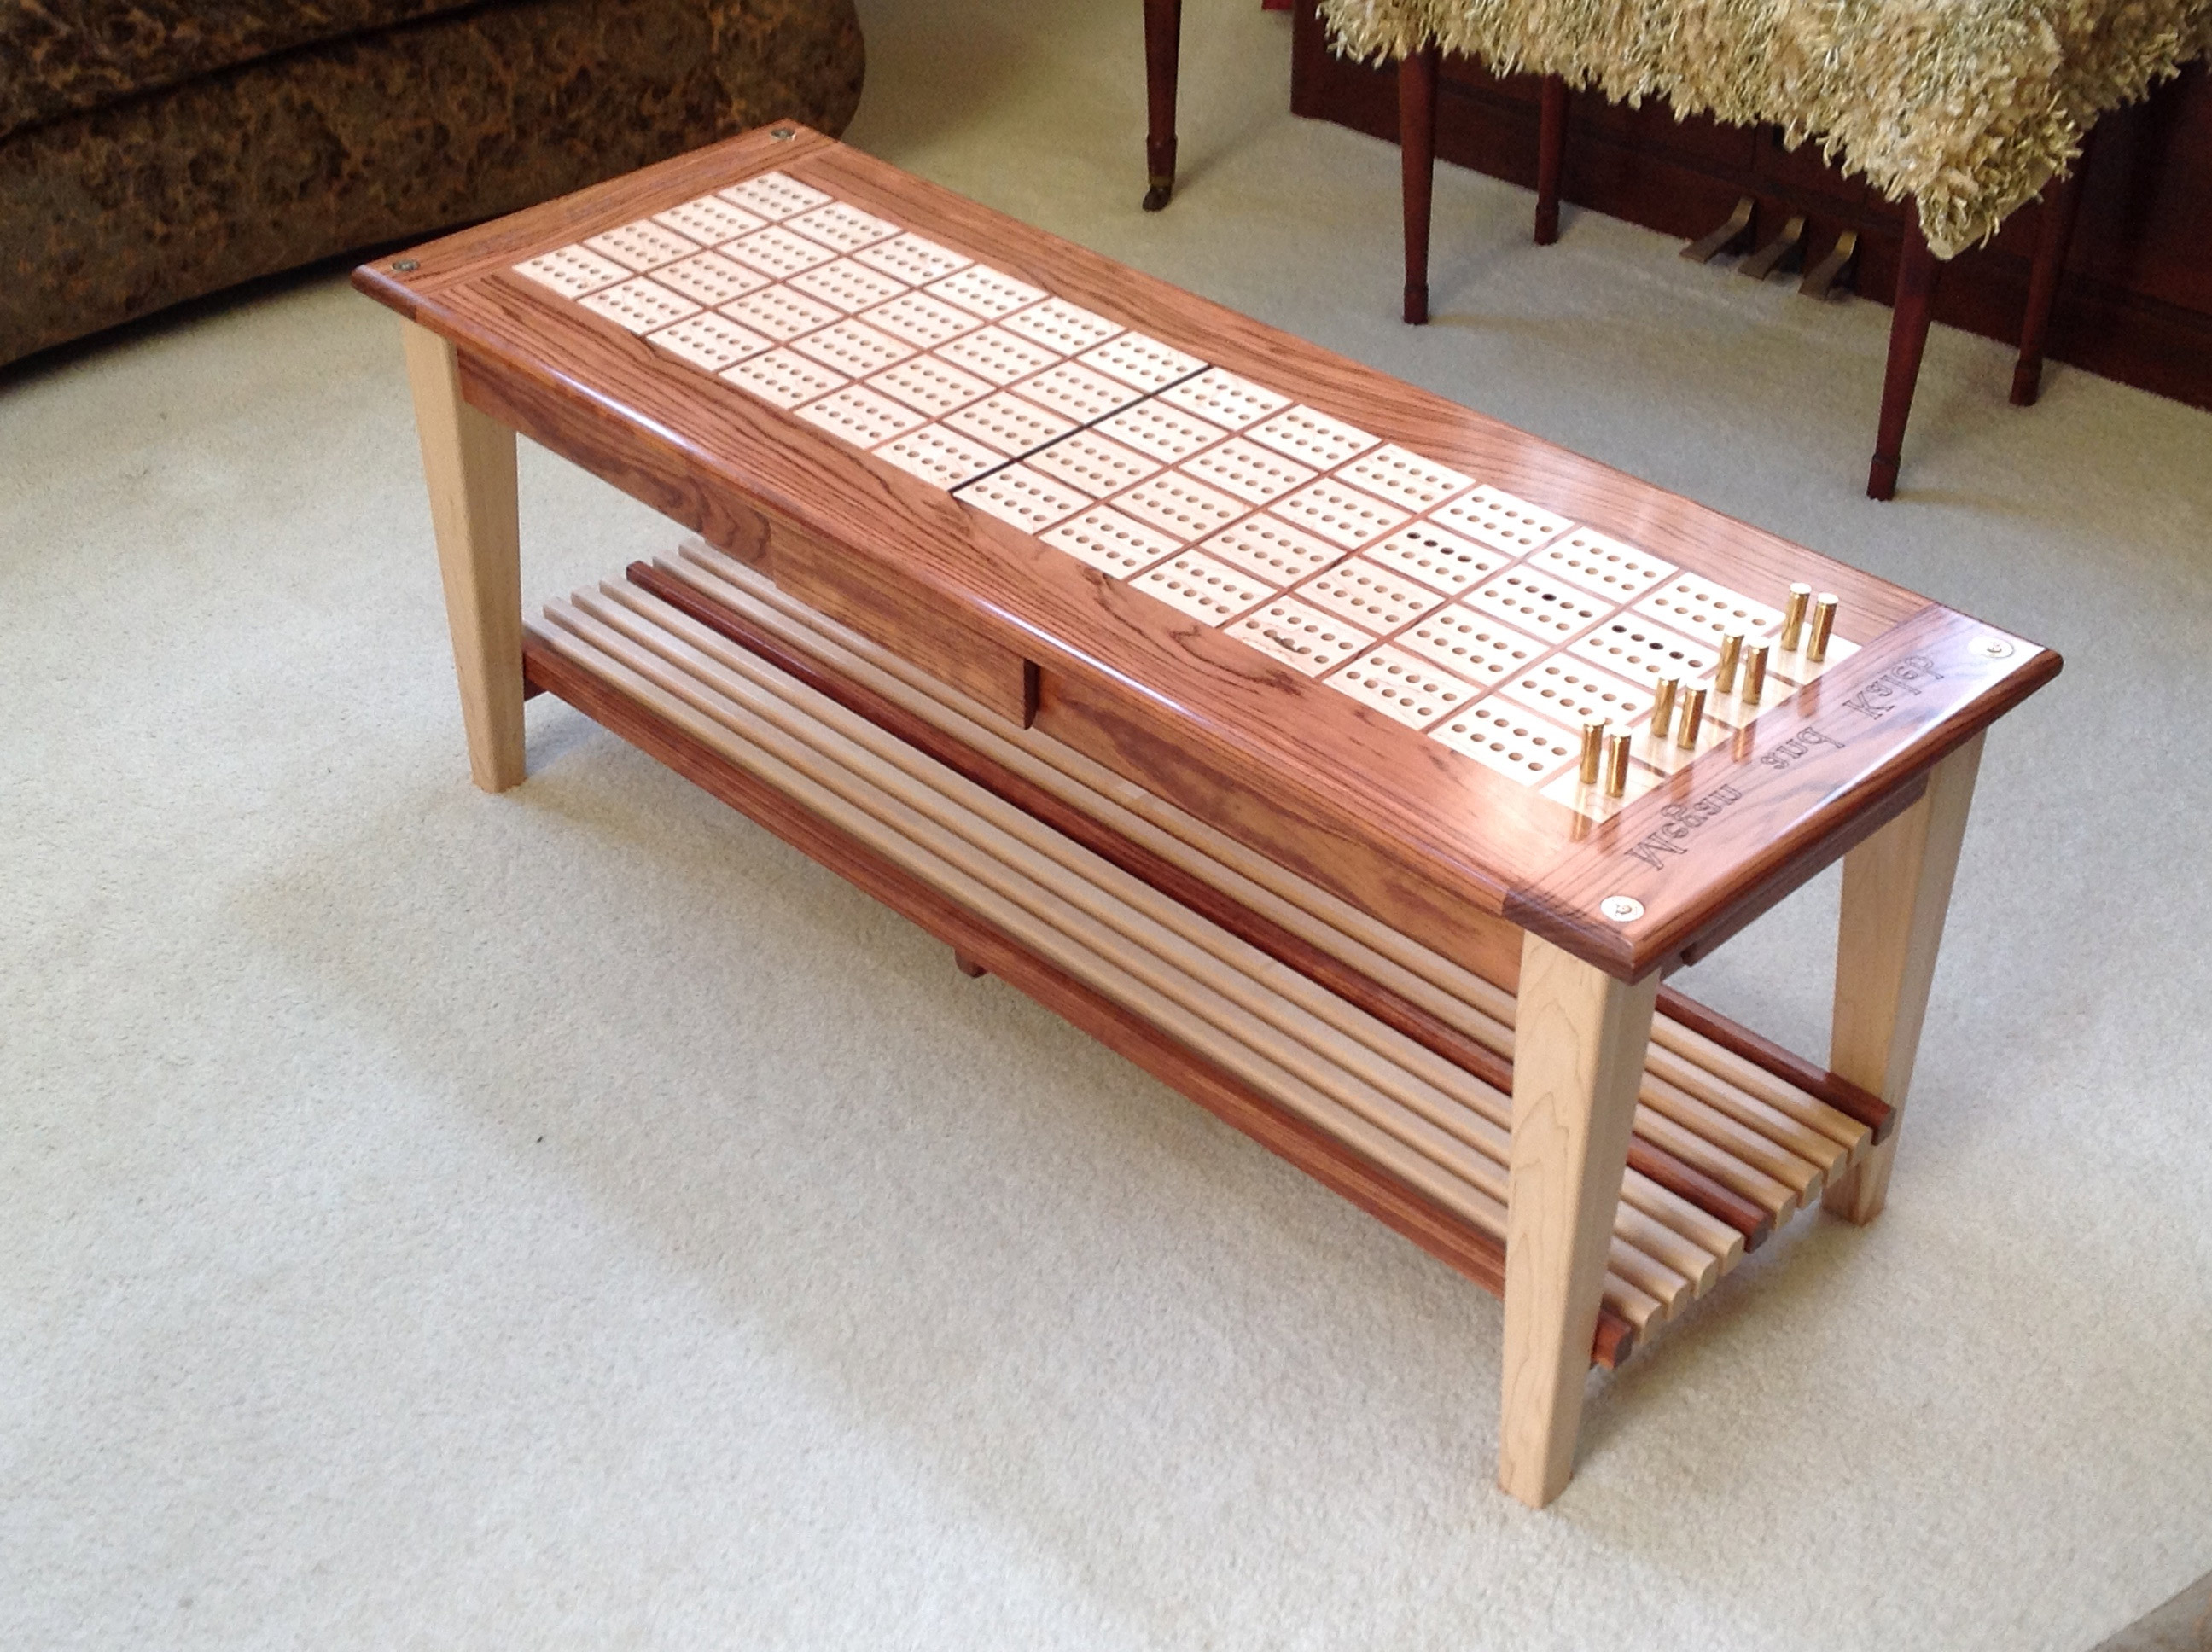 cribbage-board-coffee-table-roy-home-design